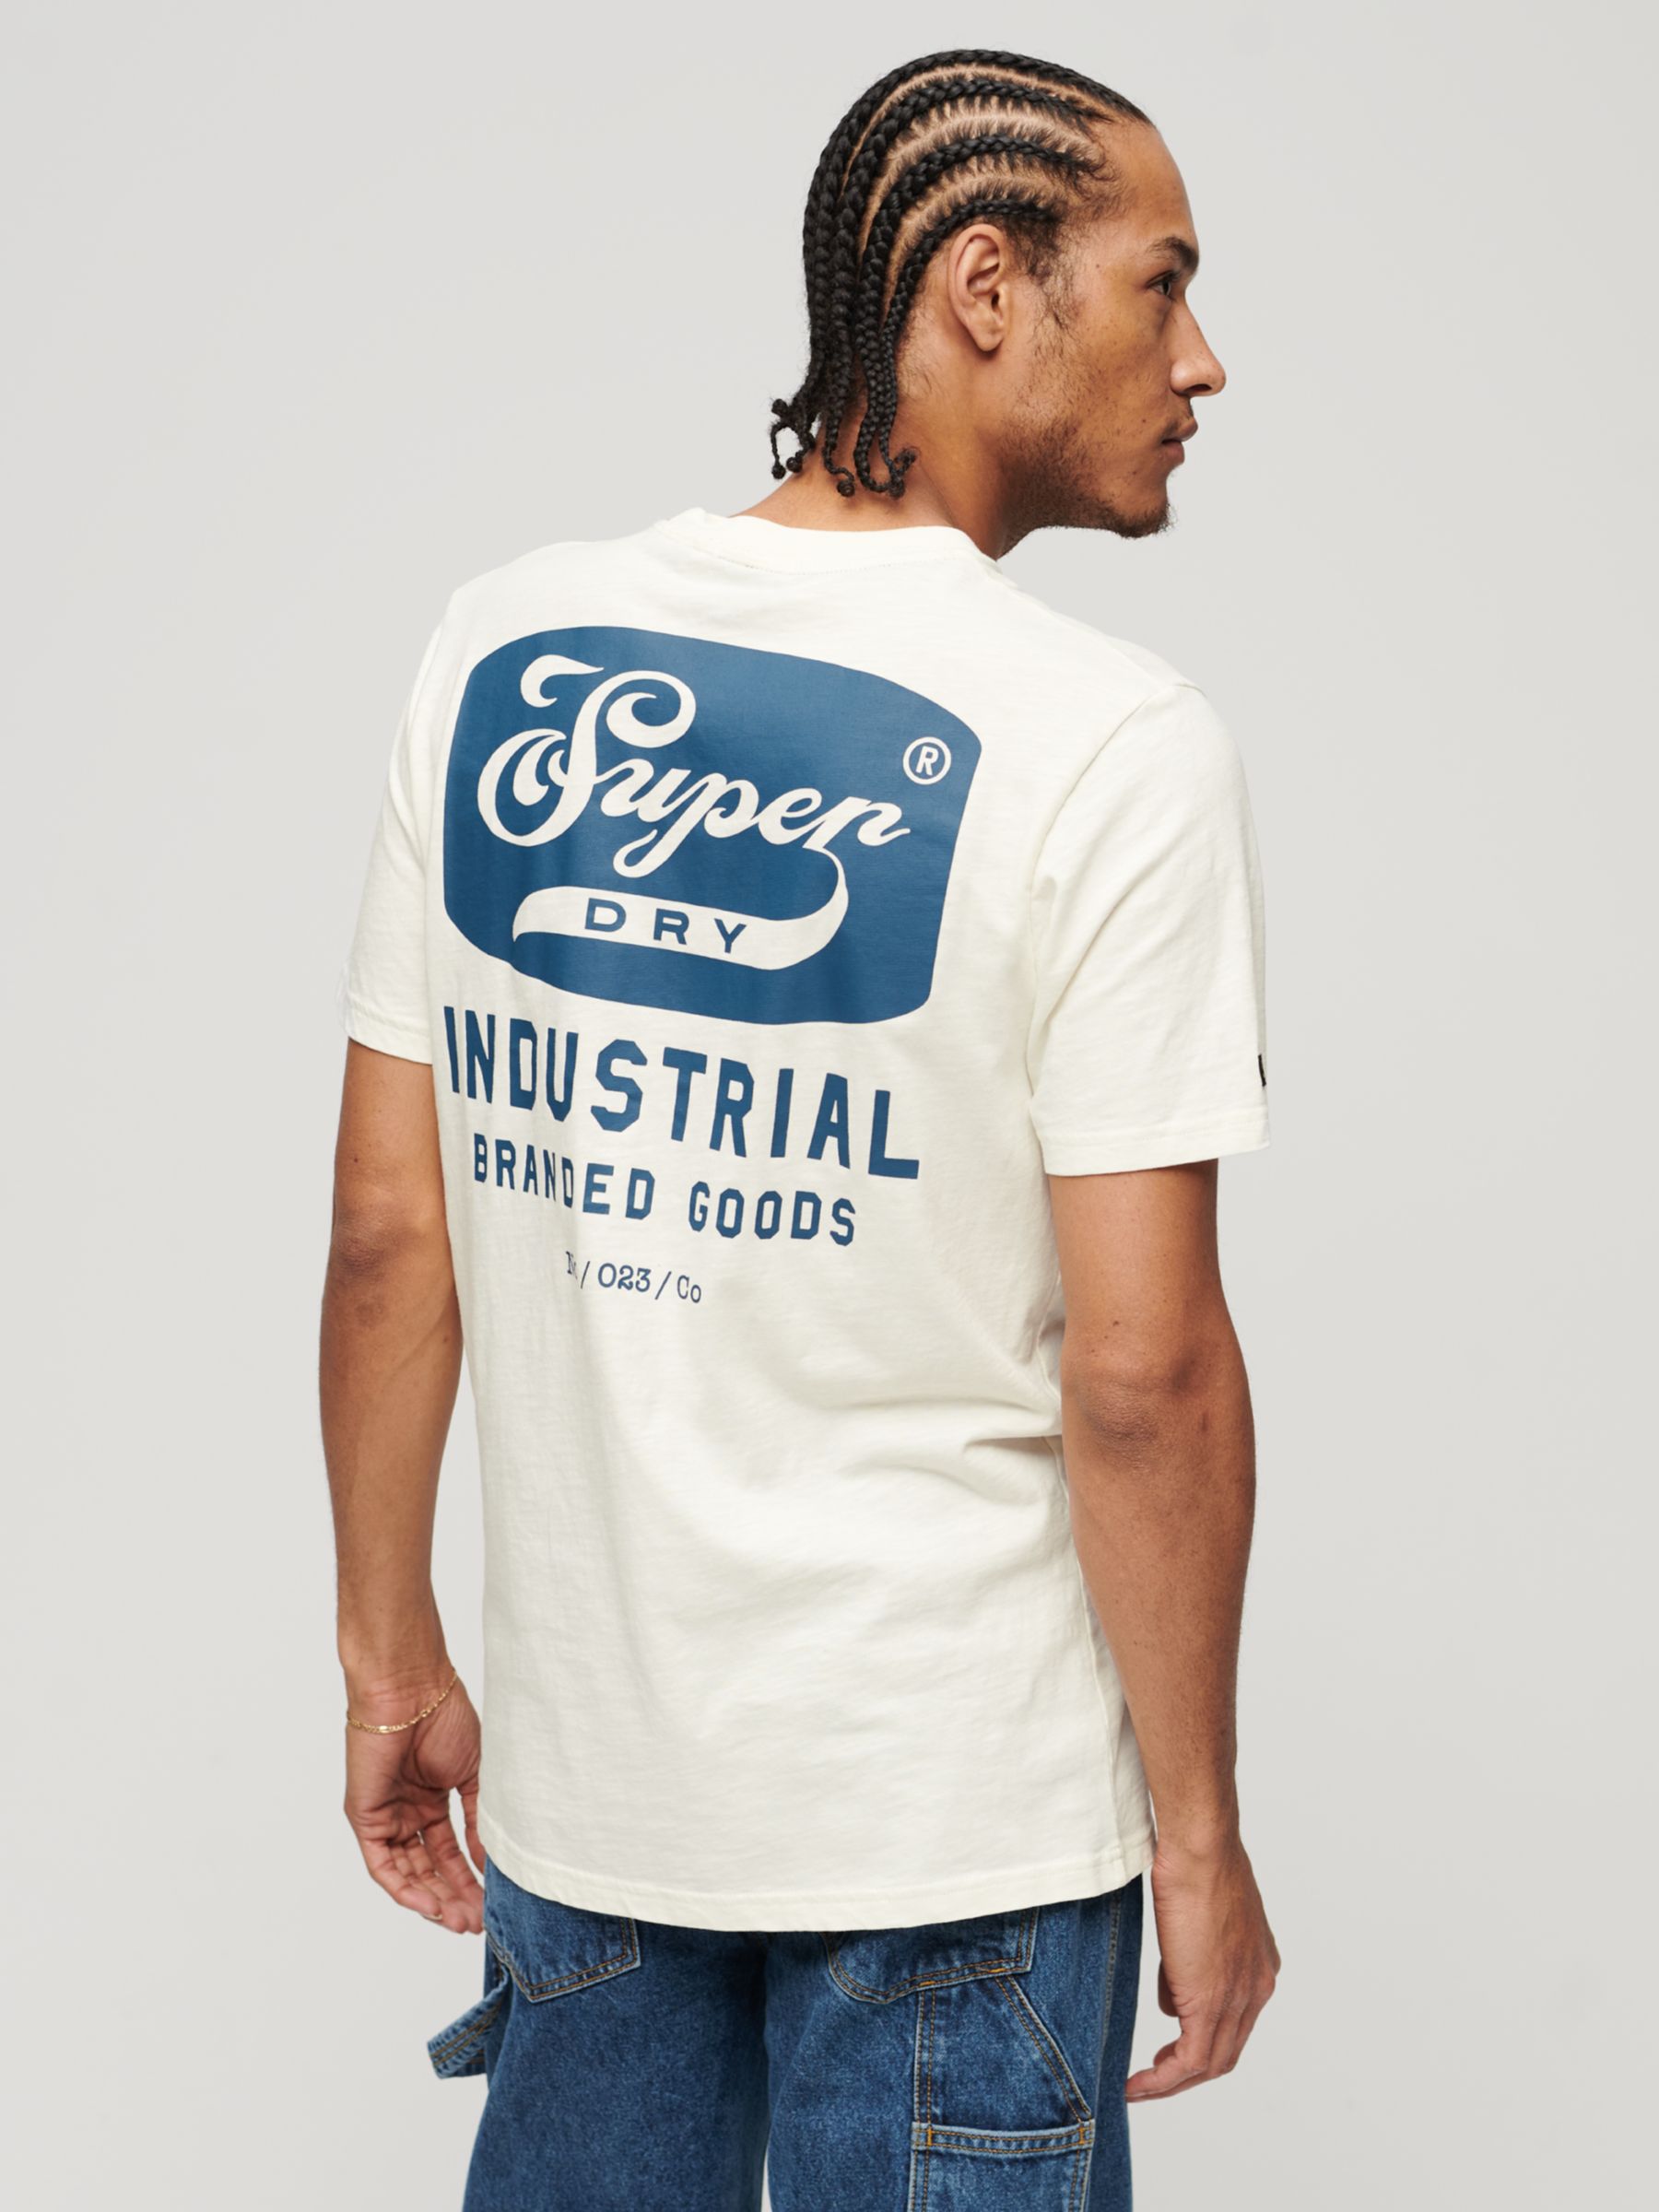 Buy Superdry Workwear Scripted Graphic T-Shirt, New Chalk White Online at johnlewis.com